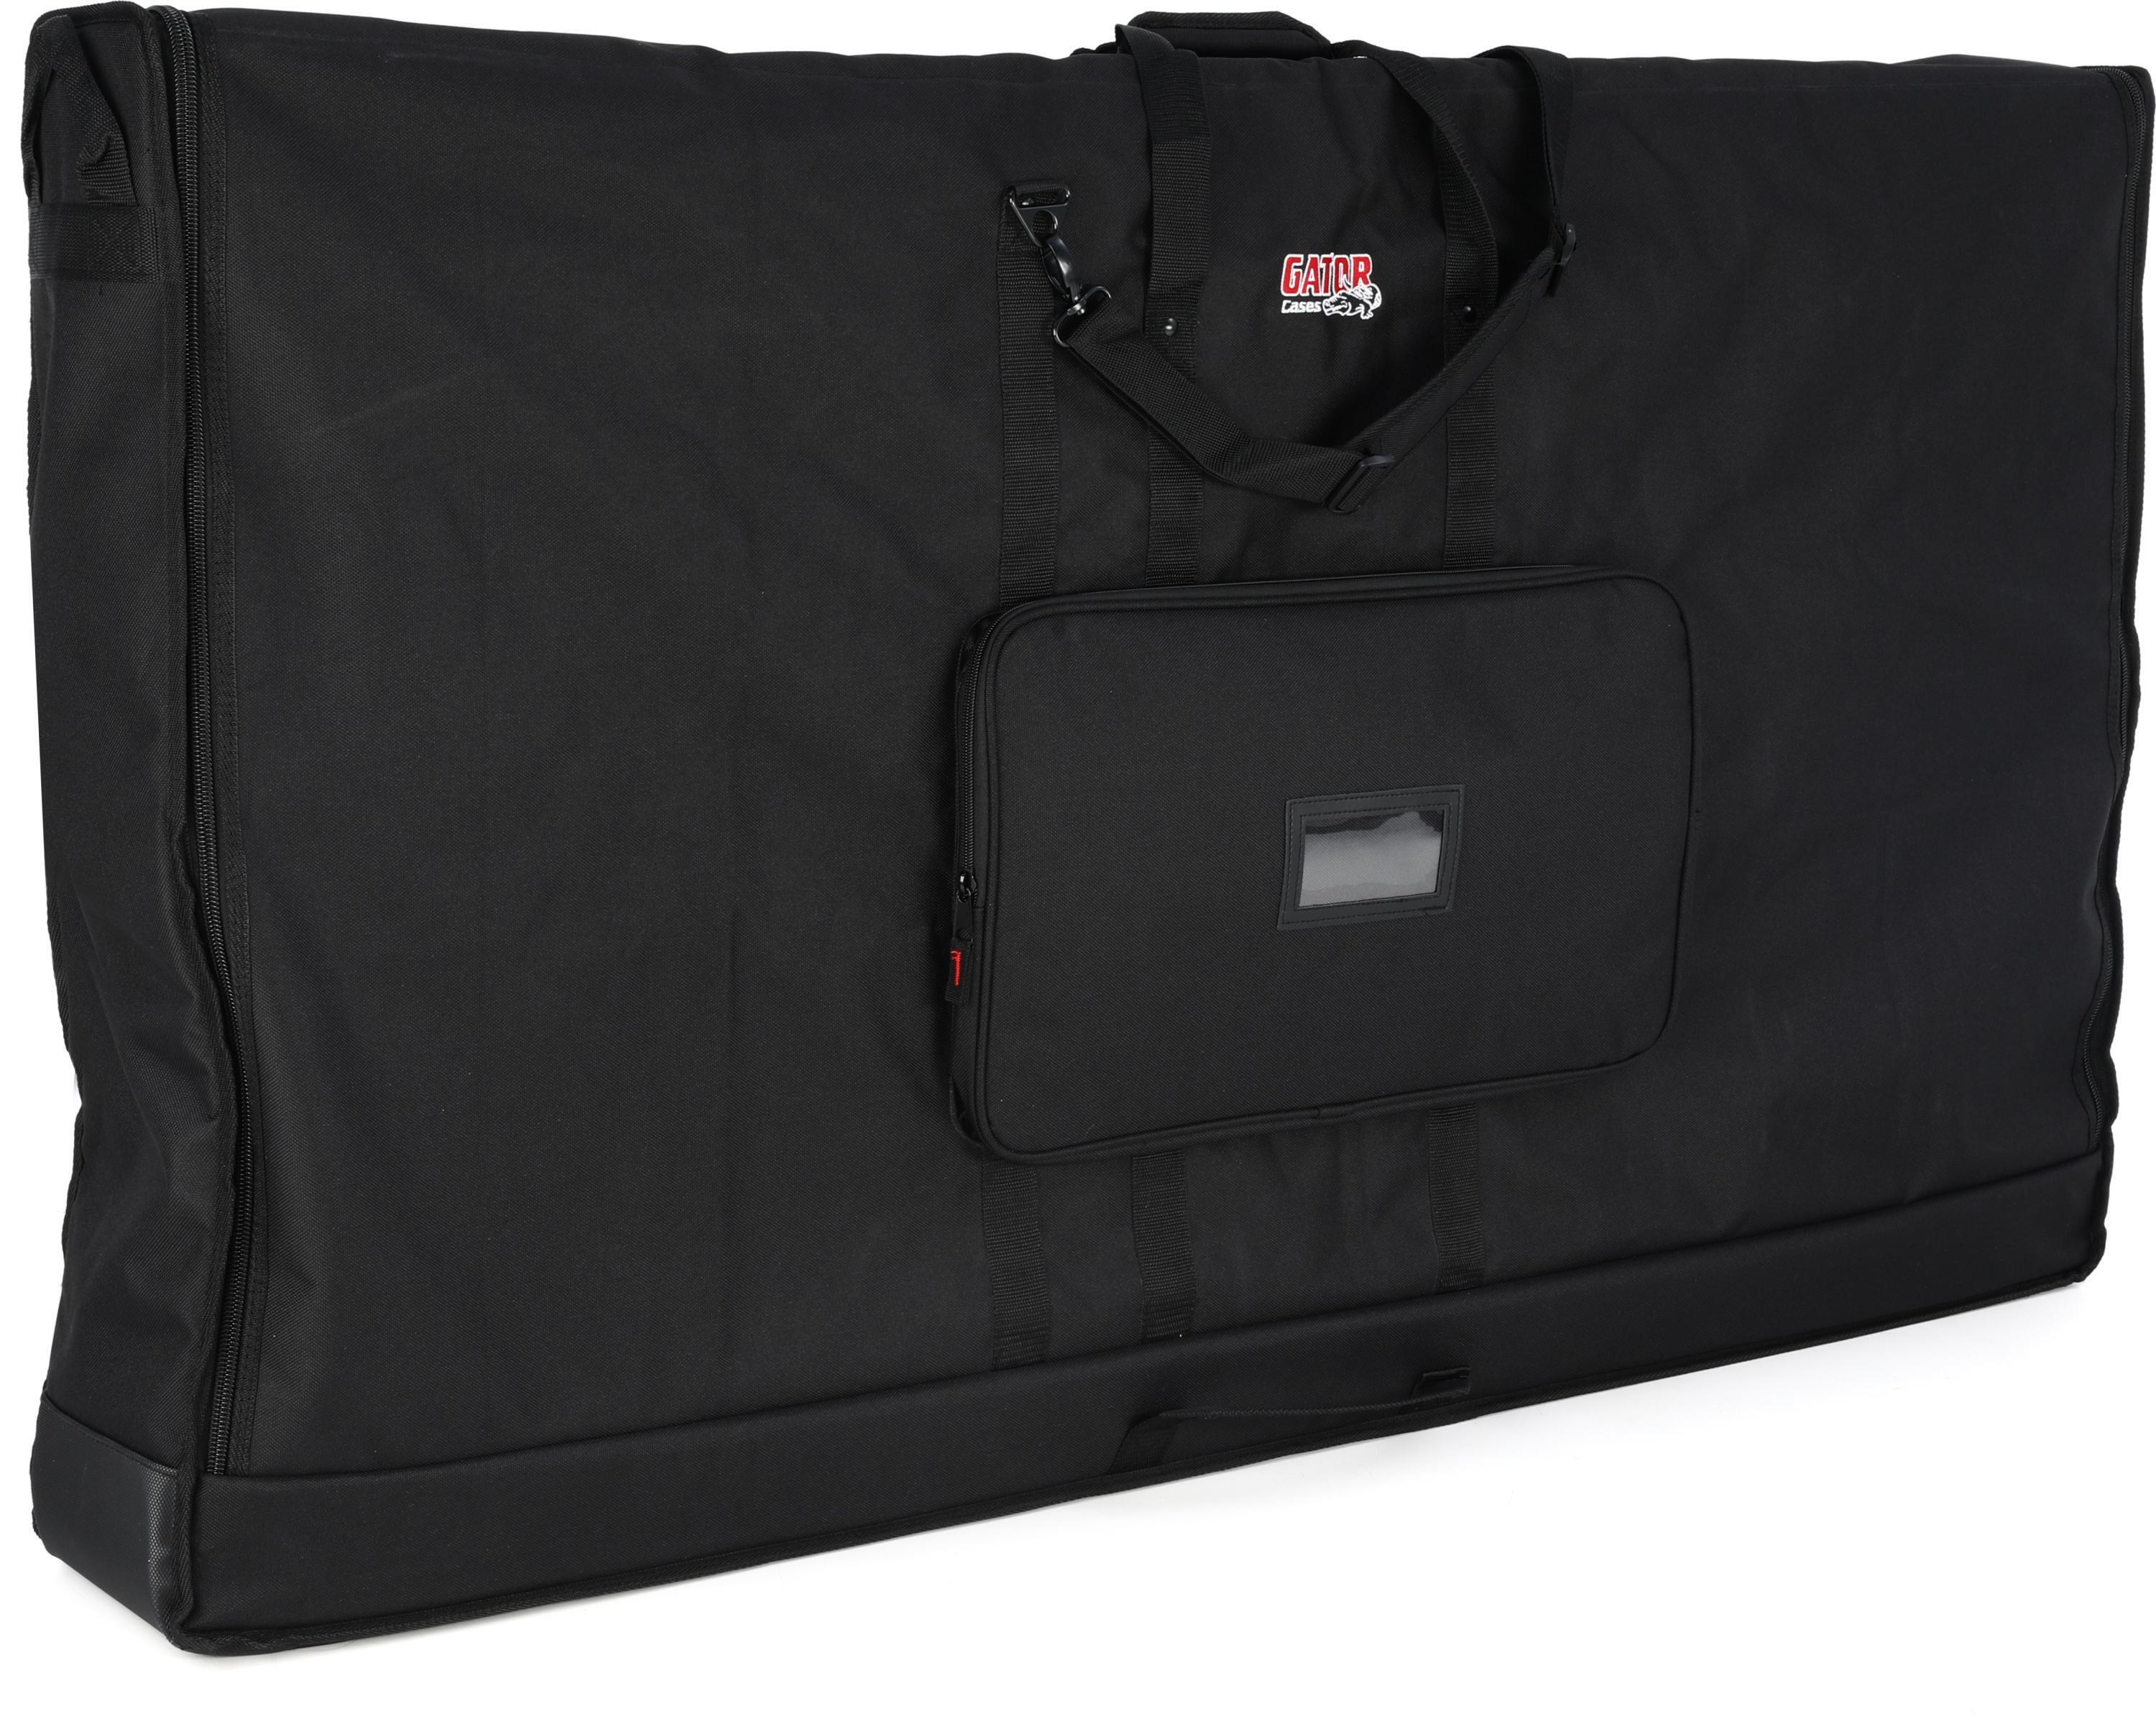 Apex 60 in. Waterproof Hitch Cargo Carrier Rack Bag with Expandable Height  CSBG-60 - The Home Depot